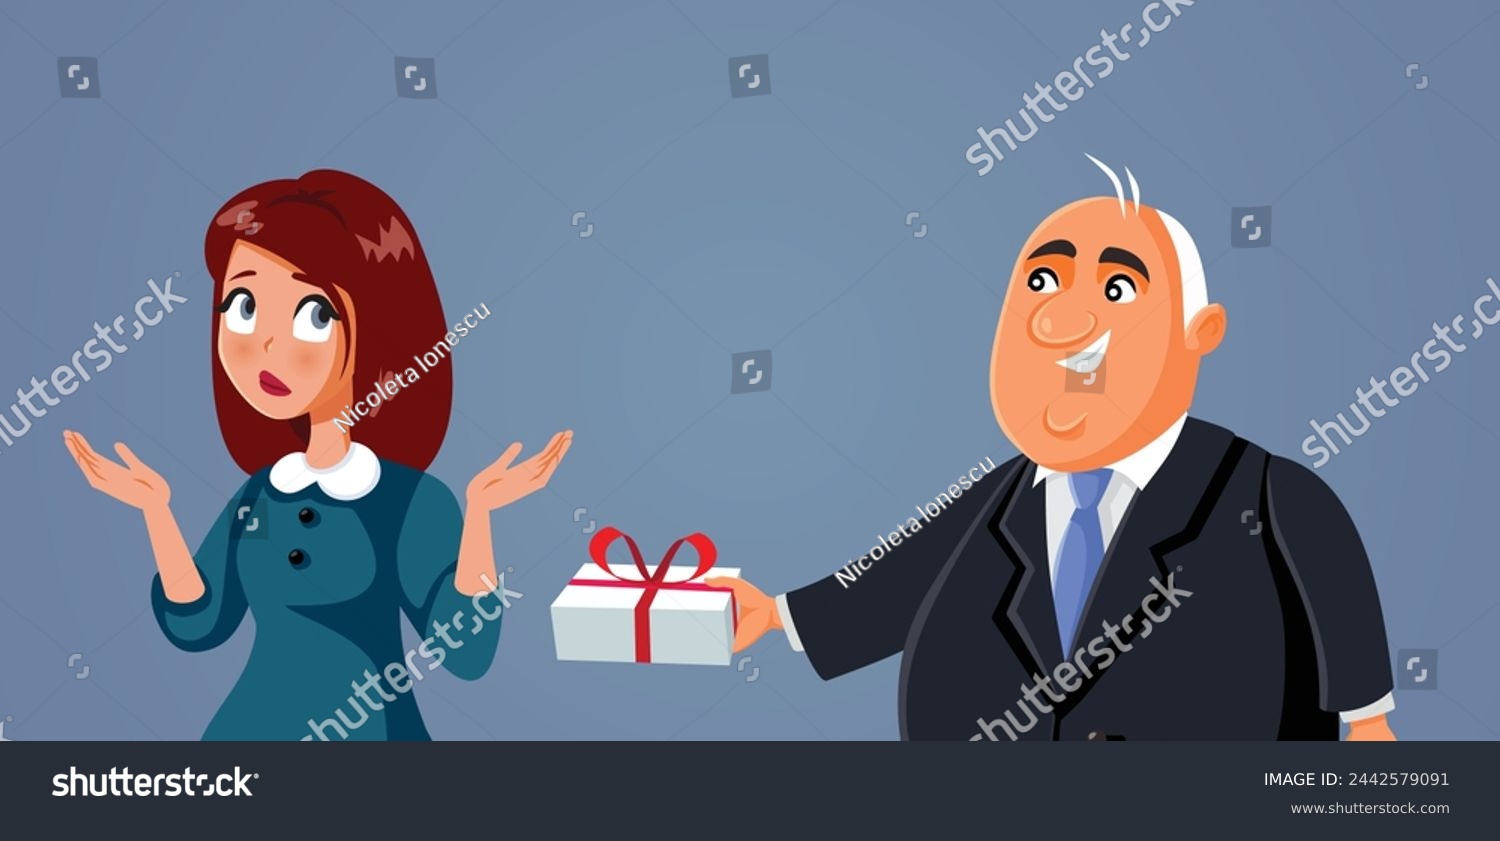 SVG of 
Business Manager Giving Inappropriate Gift to his Secretary Vector Cartoon. Unhappy woman being stalked by her boss refusing advances in the workplace
 svg